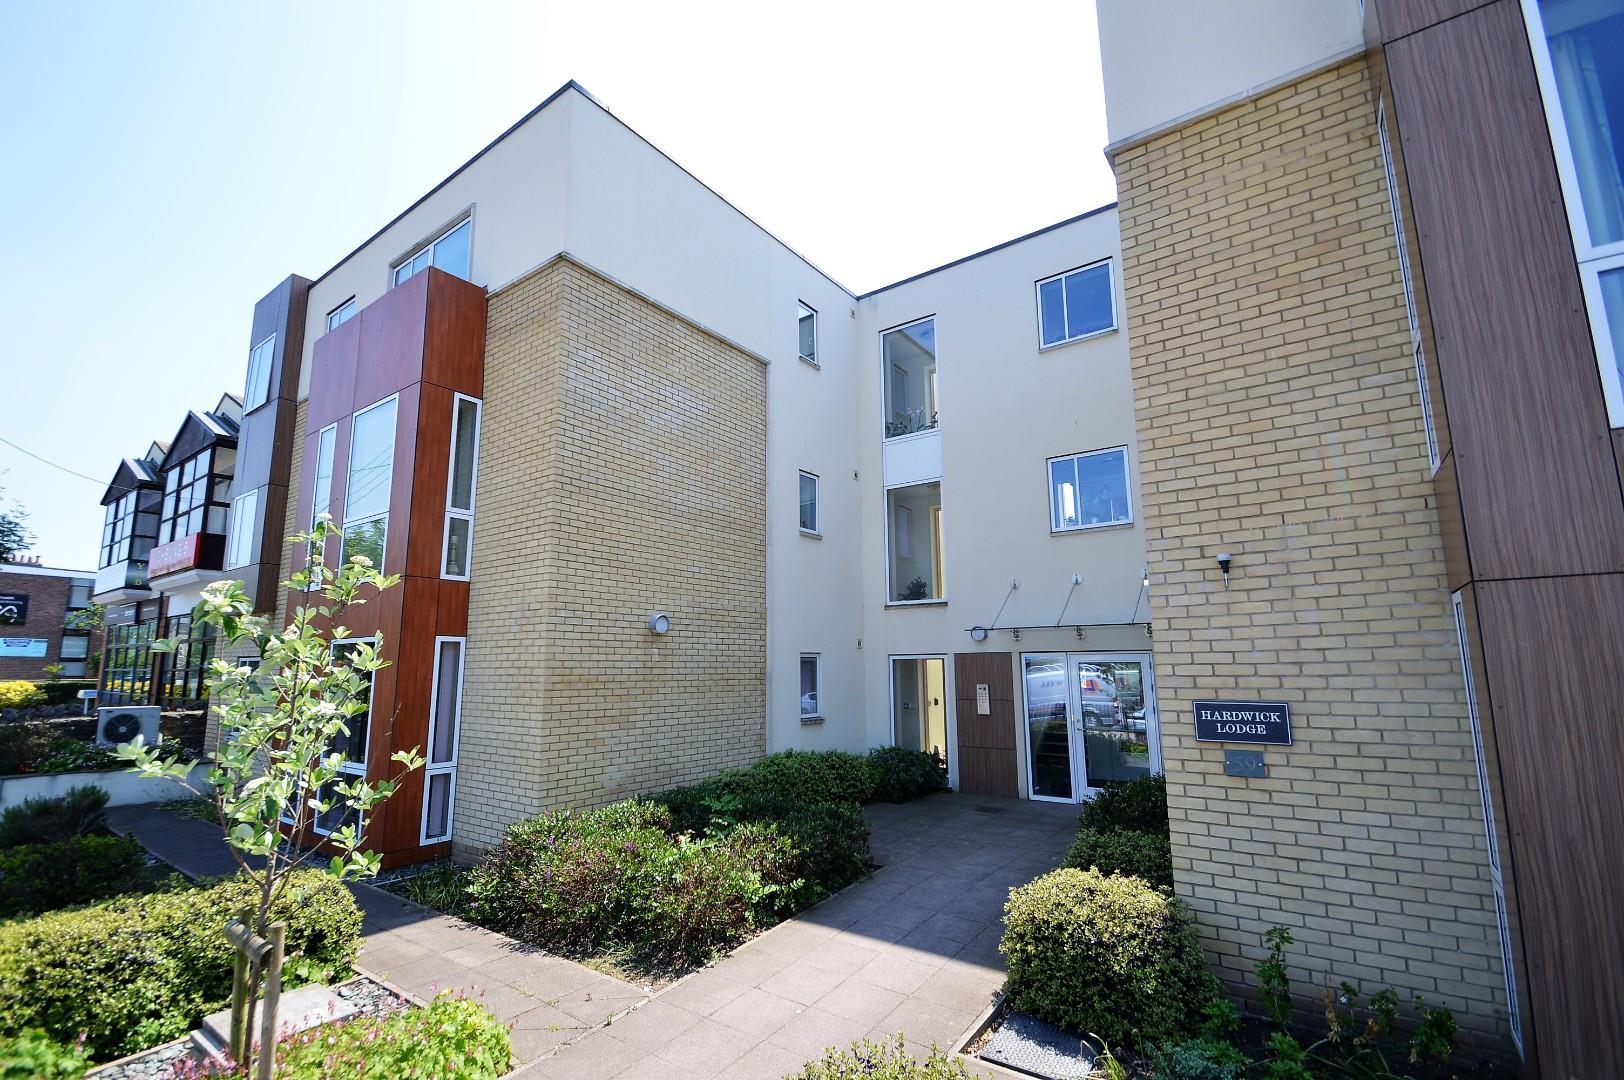 Ground floor retirement apartment in the centre of Yatton